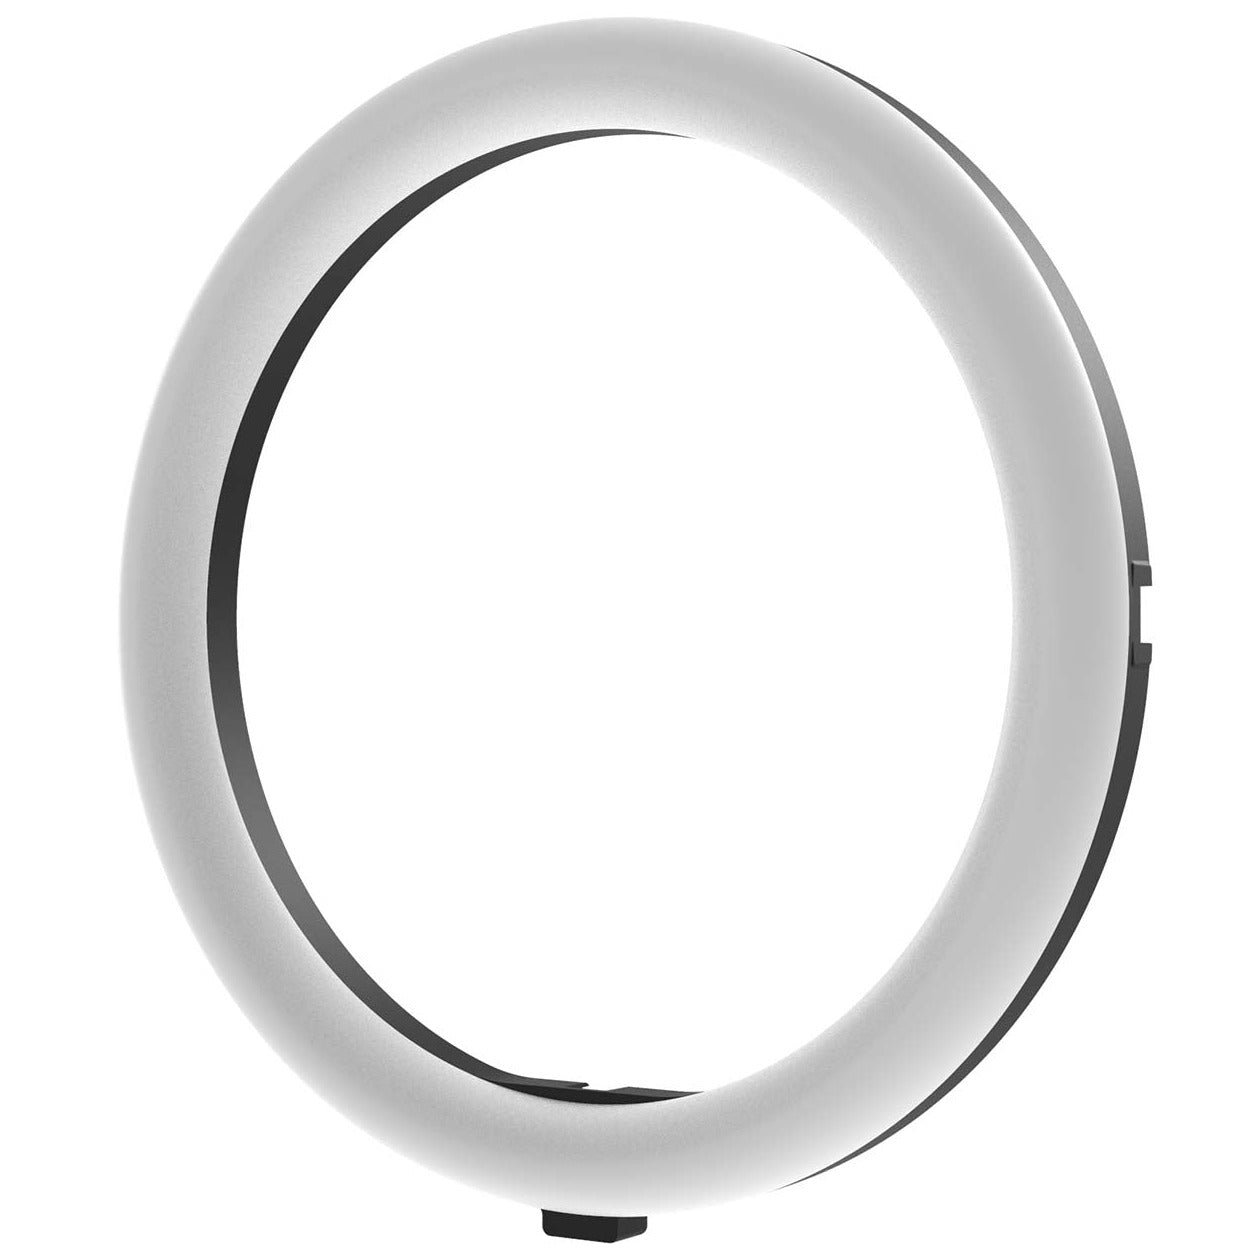 Ring Light Effect PNG Transparent, Dream Ring Light Effect, Light, Light  Effect, Fantasy Light PNG Image For Free Download